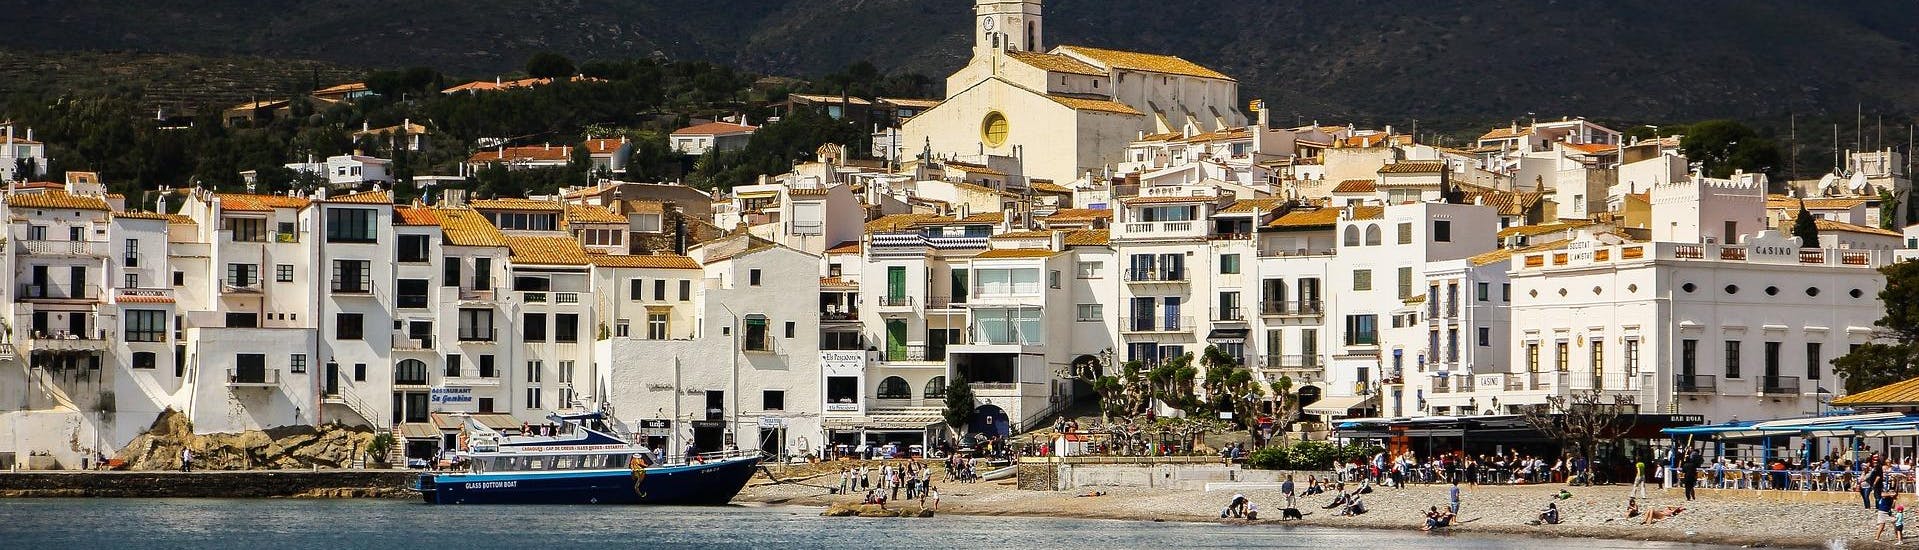 View of the coast during a boat trip to Cadaqués.